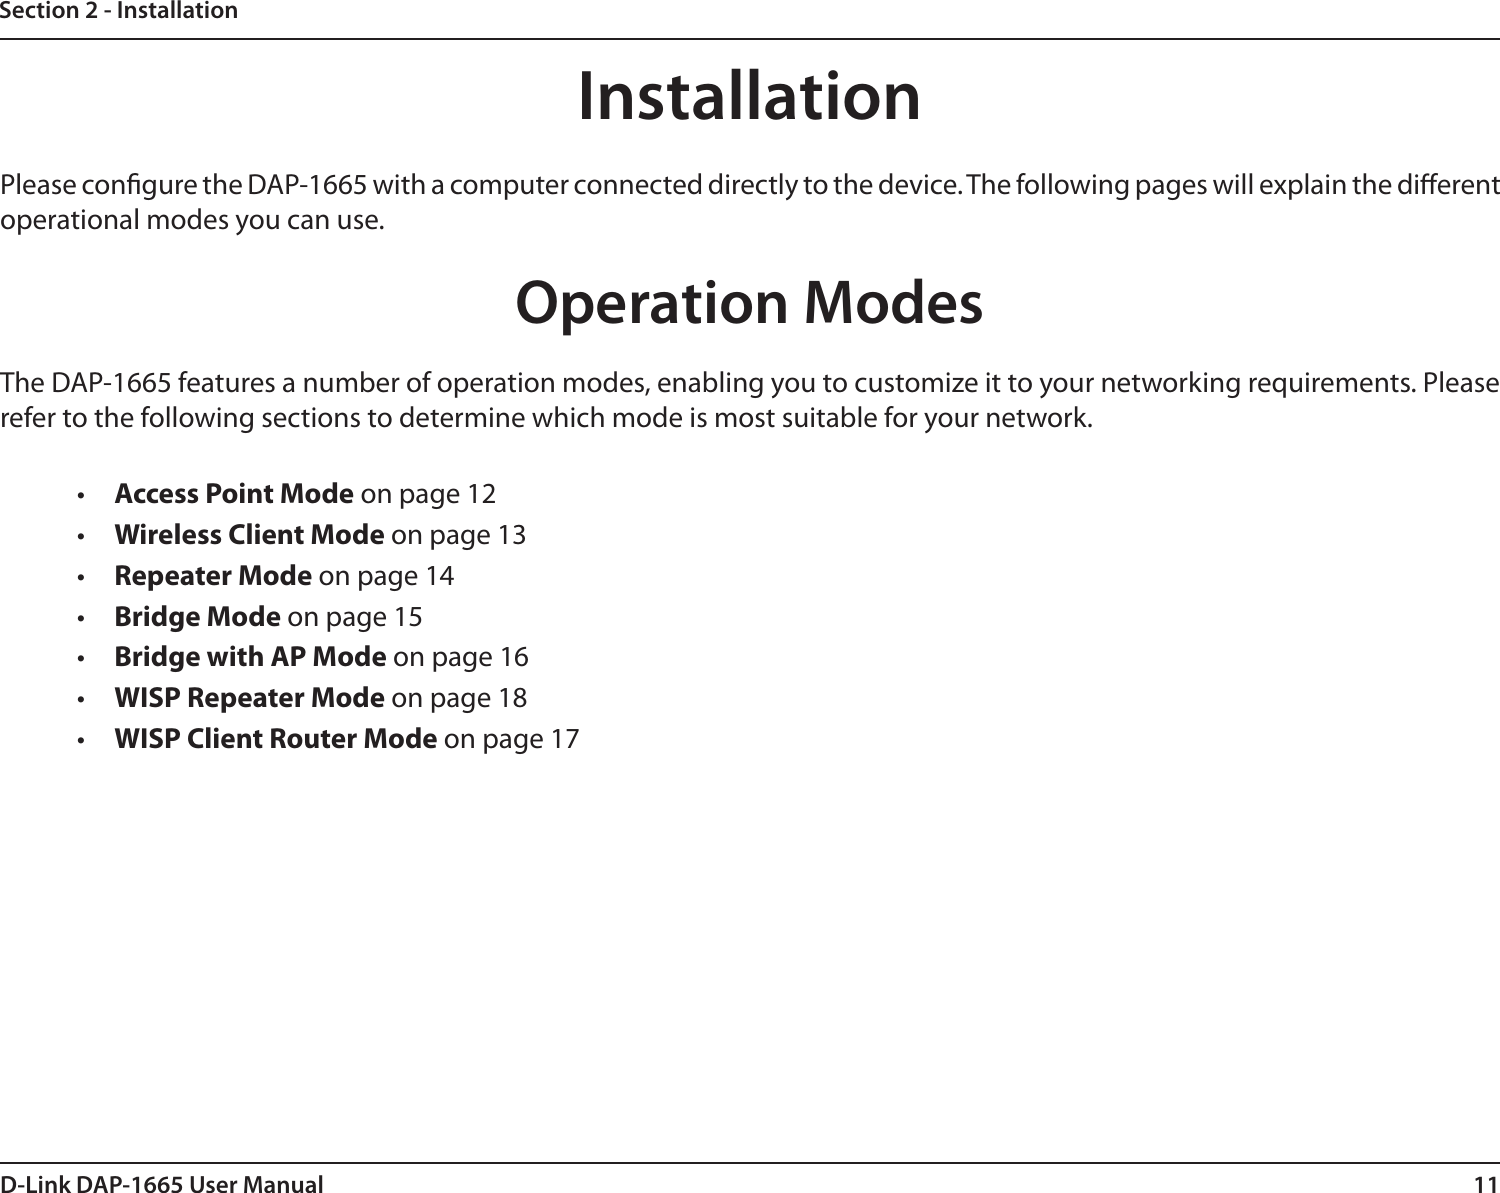 11D-Link DAP-1665 User ManualSection 2 - InstallationInstallationPlease congure the DAP-1665 with a computer connected directly to the device. The following pages will explain the dierent operational modes you can use. Operation ModesThe DAP-1665 features a number of operation modes, enabling you to customize it to your networking requirements. Please refer to the following sections to determine which mode is most suitable for your network.•  Access Point Mode on page 12•  Wireless Client Mode on page 13•  Repeater Mode on page 14•  Bridge Mode on page 15•  Bridge with AP Mode on page 16•  WISP Repeater Mode on page 18•  WISP Client Router Mode on page 17